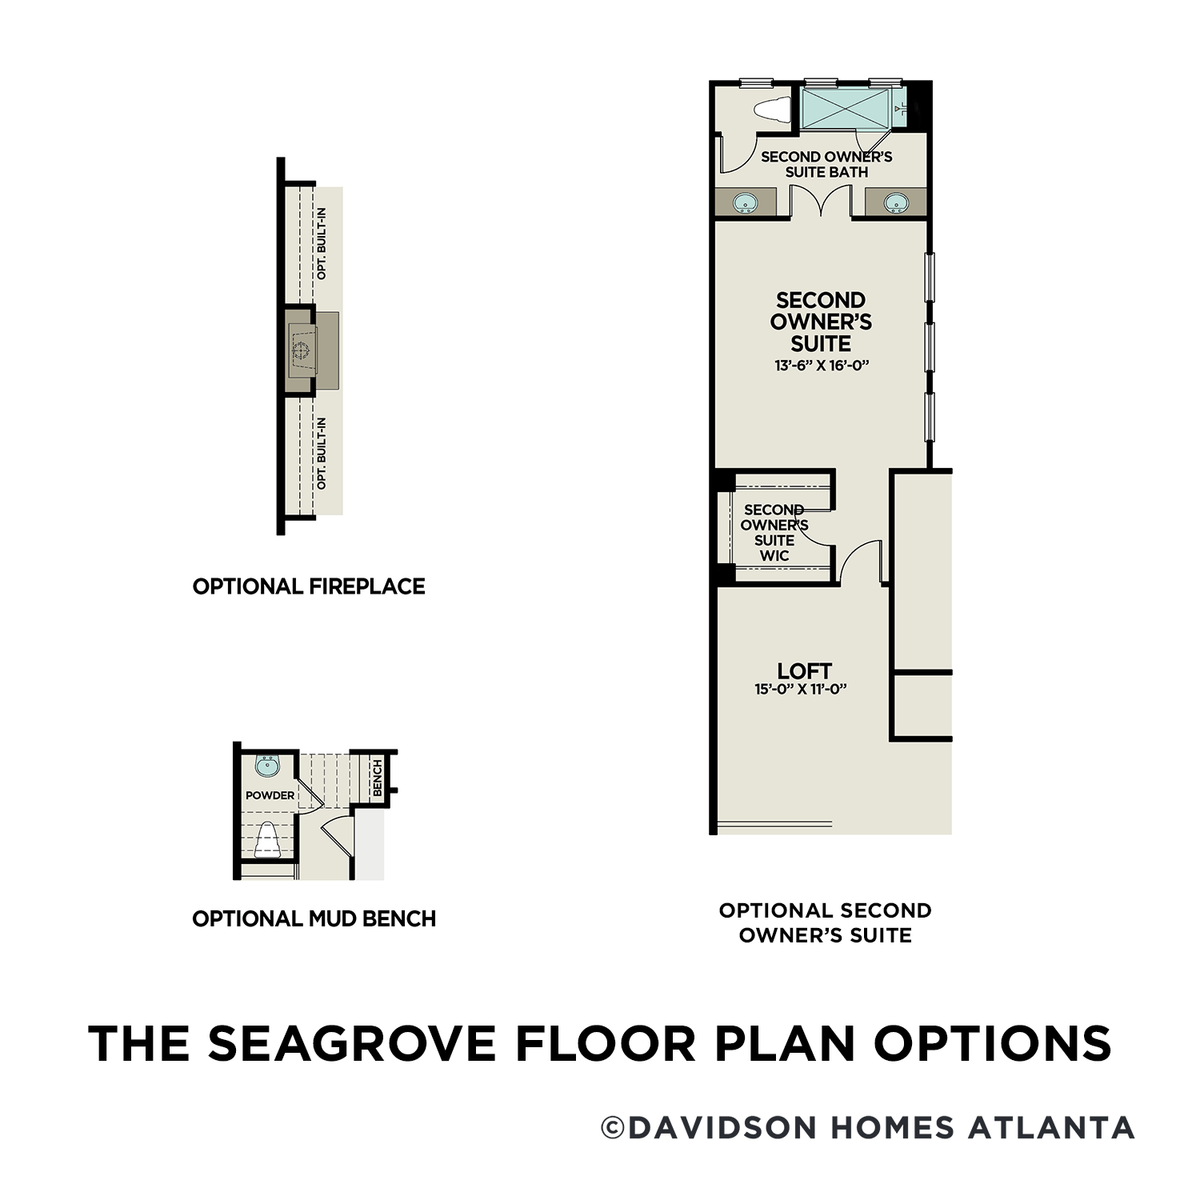 3 - The Seagrove C floor plan layout for 750 Stickley Oak Way in Davidson Homes' The Village at Towne Lake community.